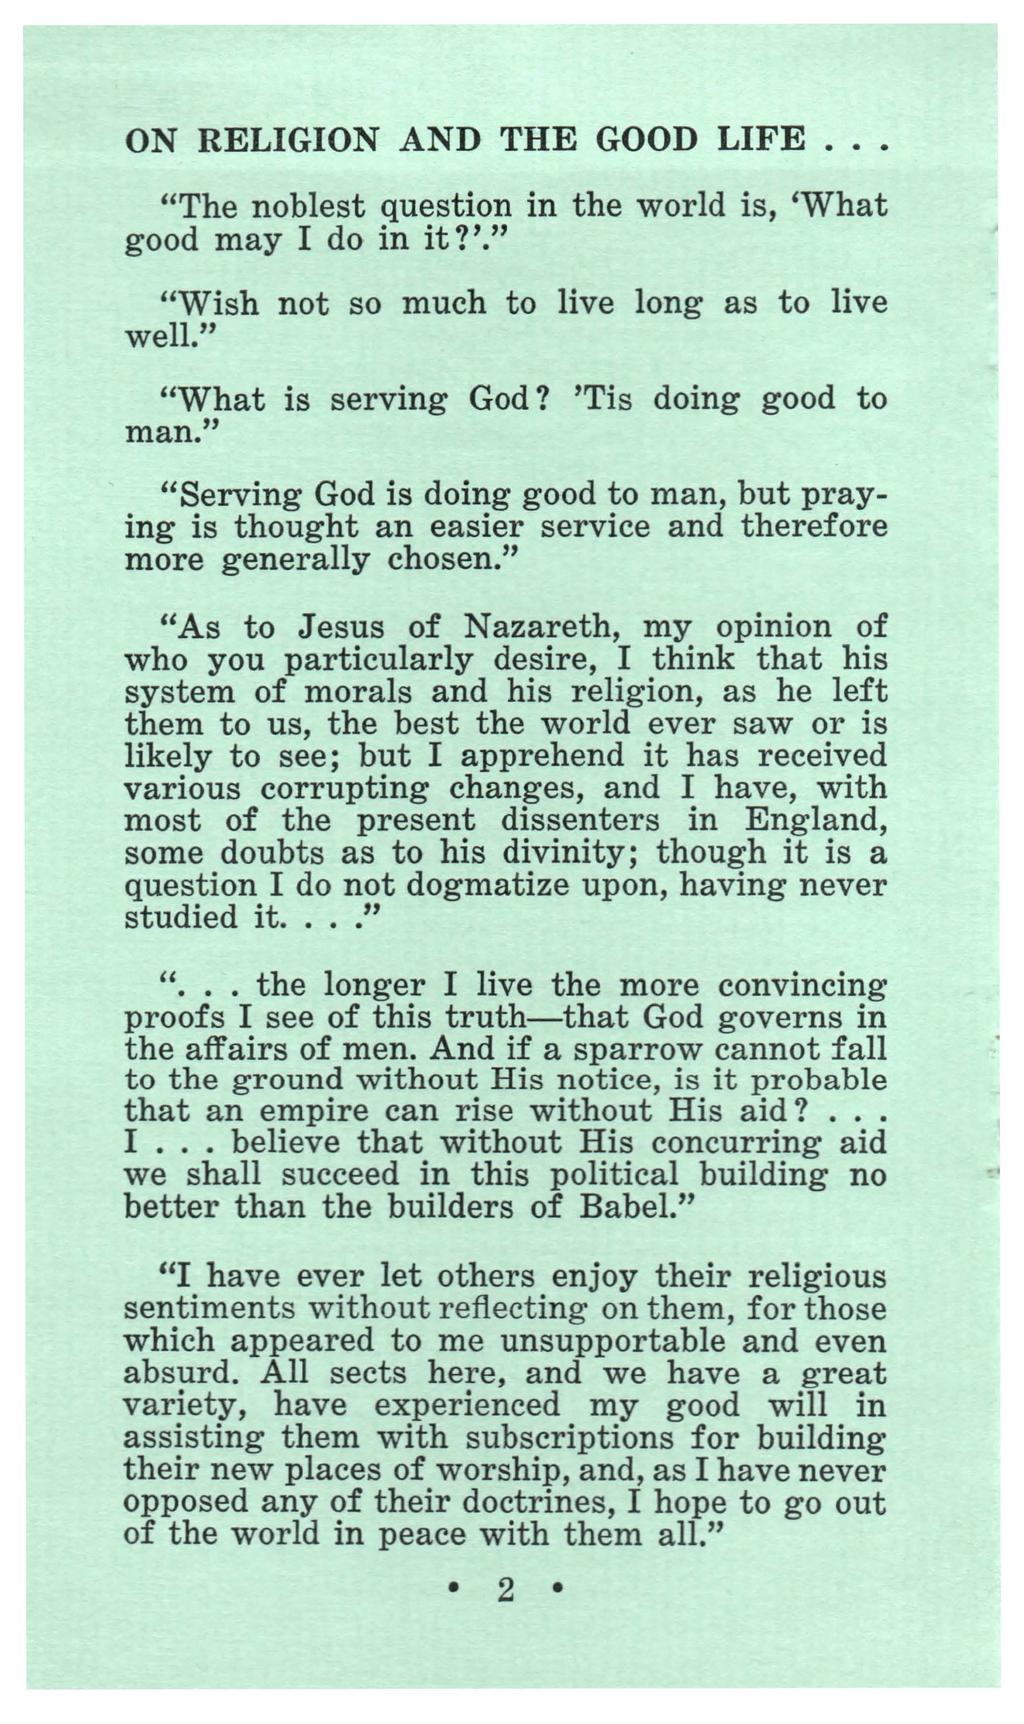 ON RELIGION AND THE GOOD LIFE.. "The noblest question in the world is, 'What good may I do in it?'." "Wish not so much to live long as to live well." "What is serving God? 'Tis doing good to man.